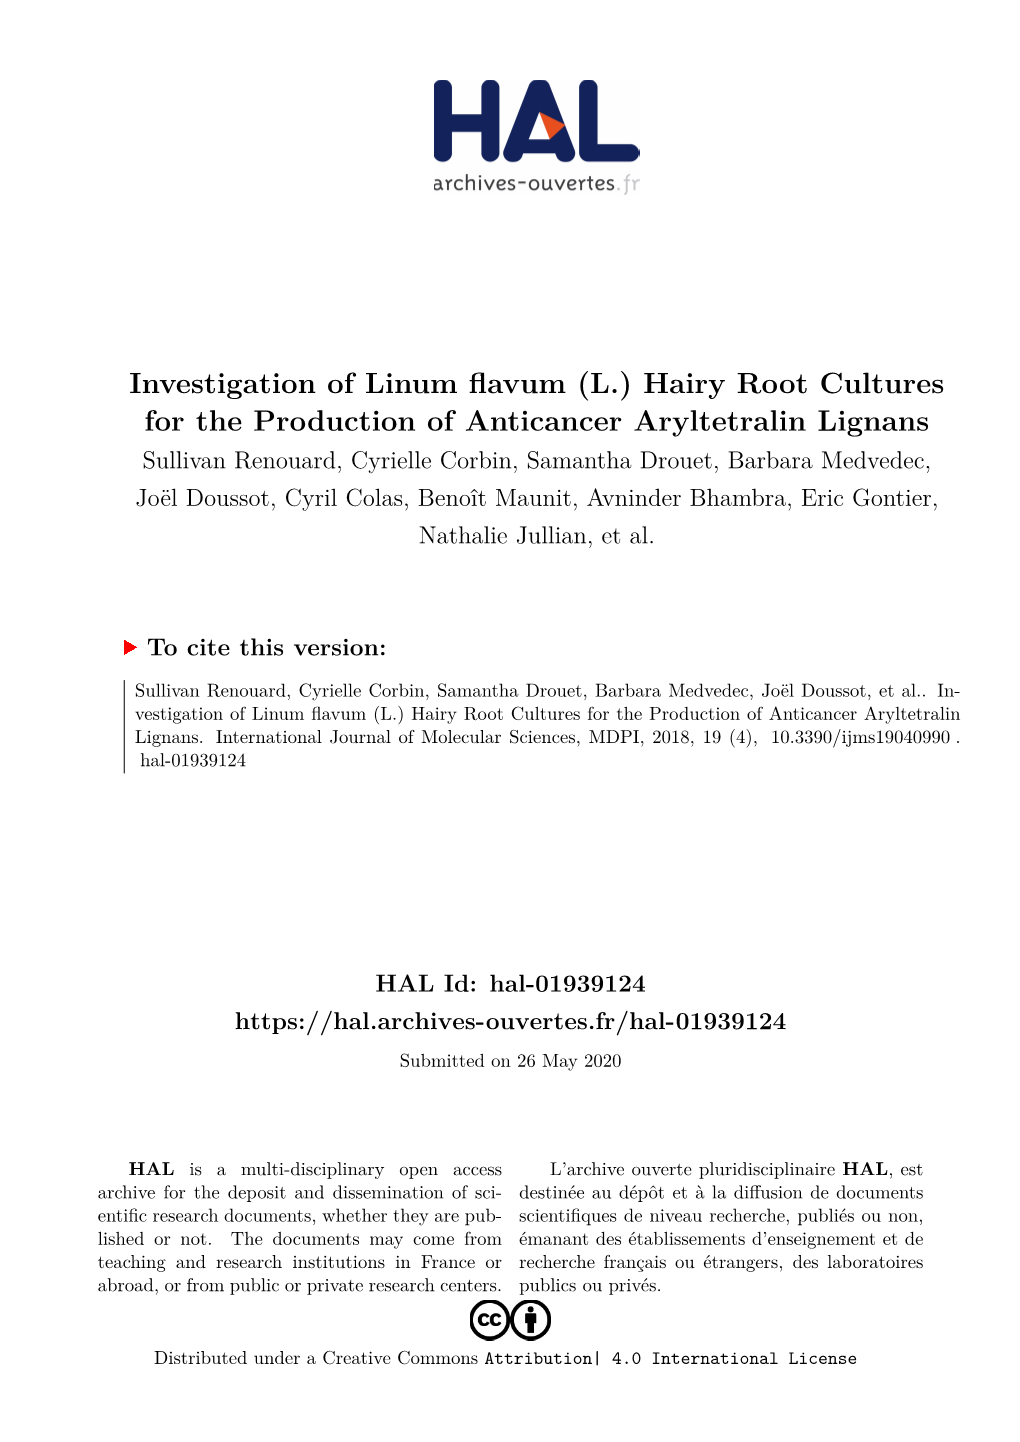 Investigation of Linum Flavum (L.) Hairy Root